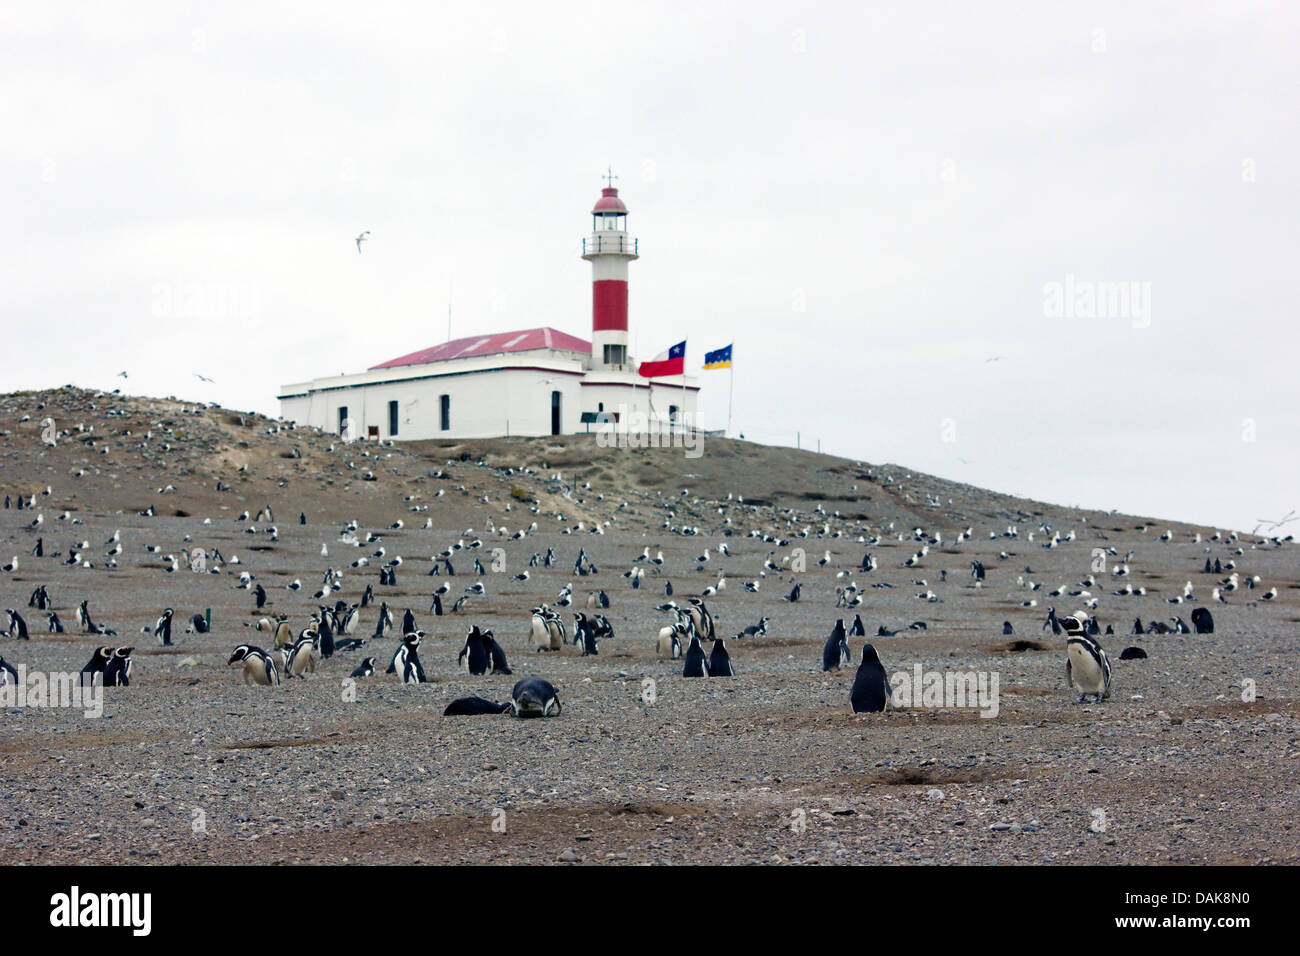 Magellanic penguin (Spheniscus magellanicus), penguin colony in front of a lighthouse, Chile, Isla Magdalena, Punta Arenas Stock Photo